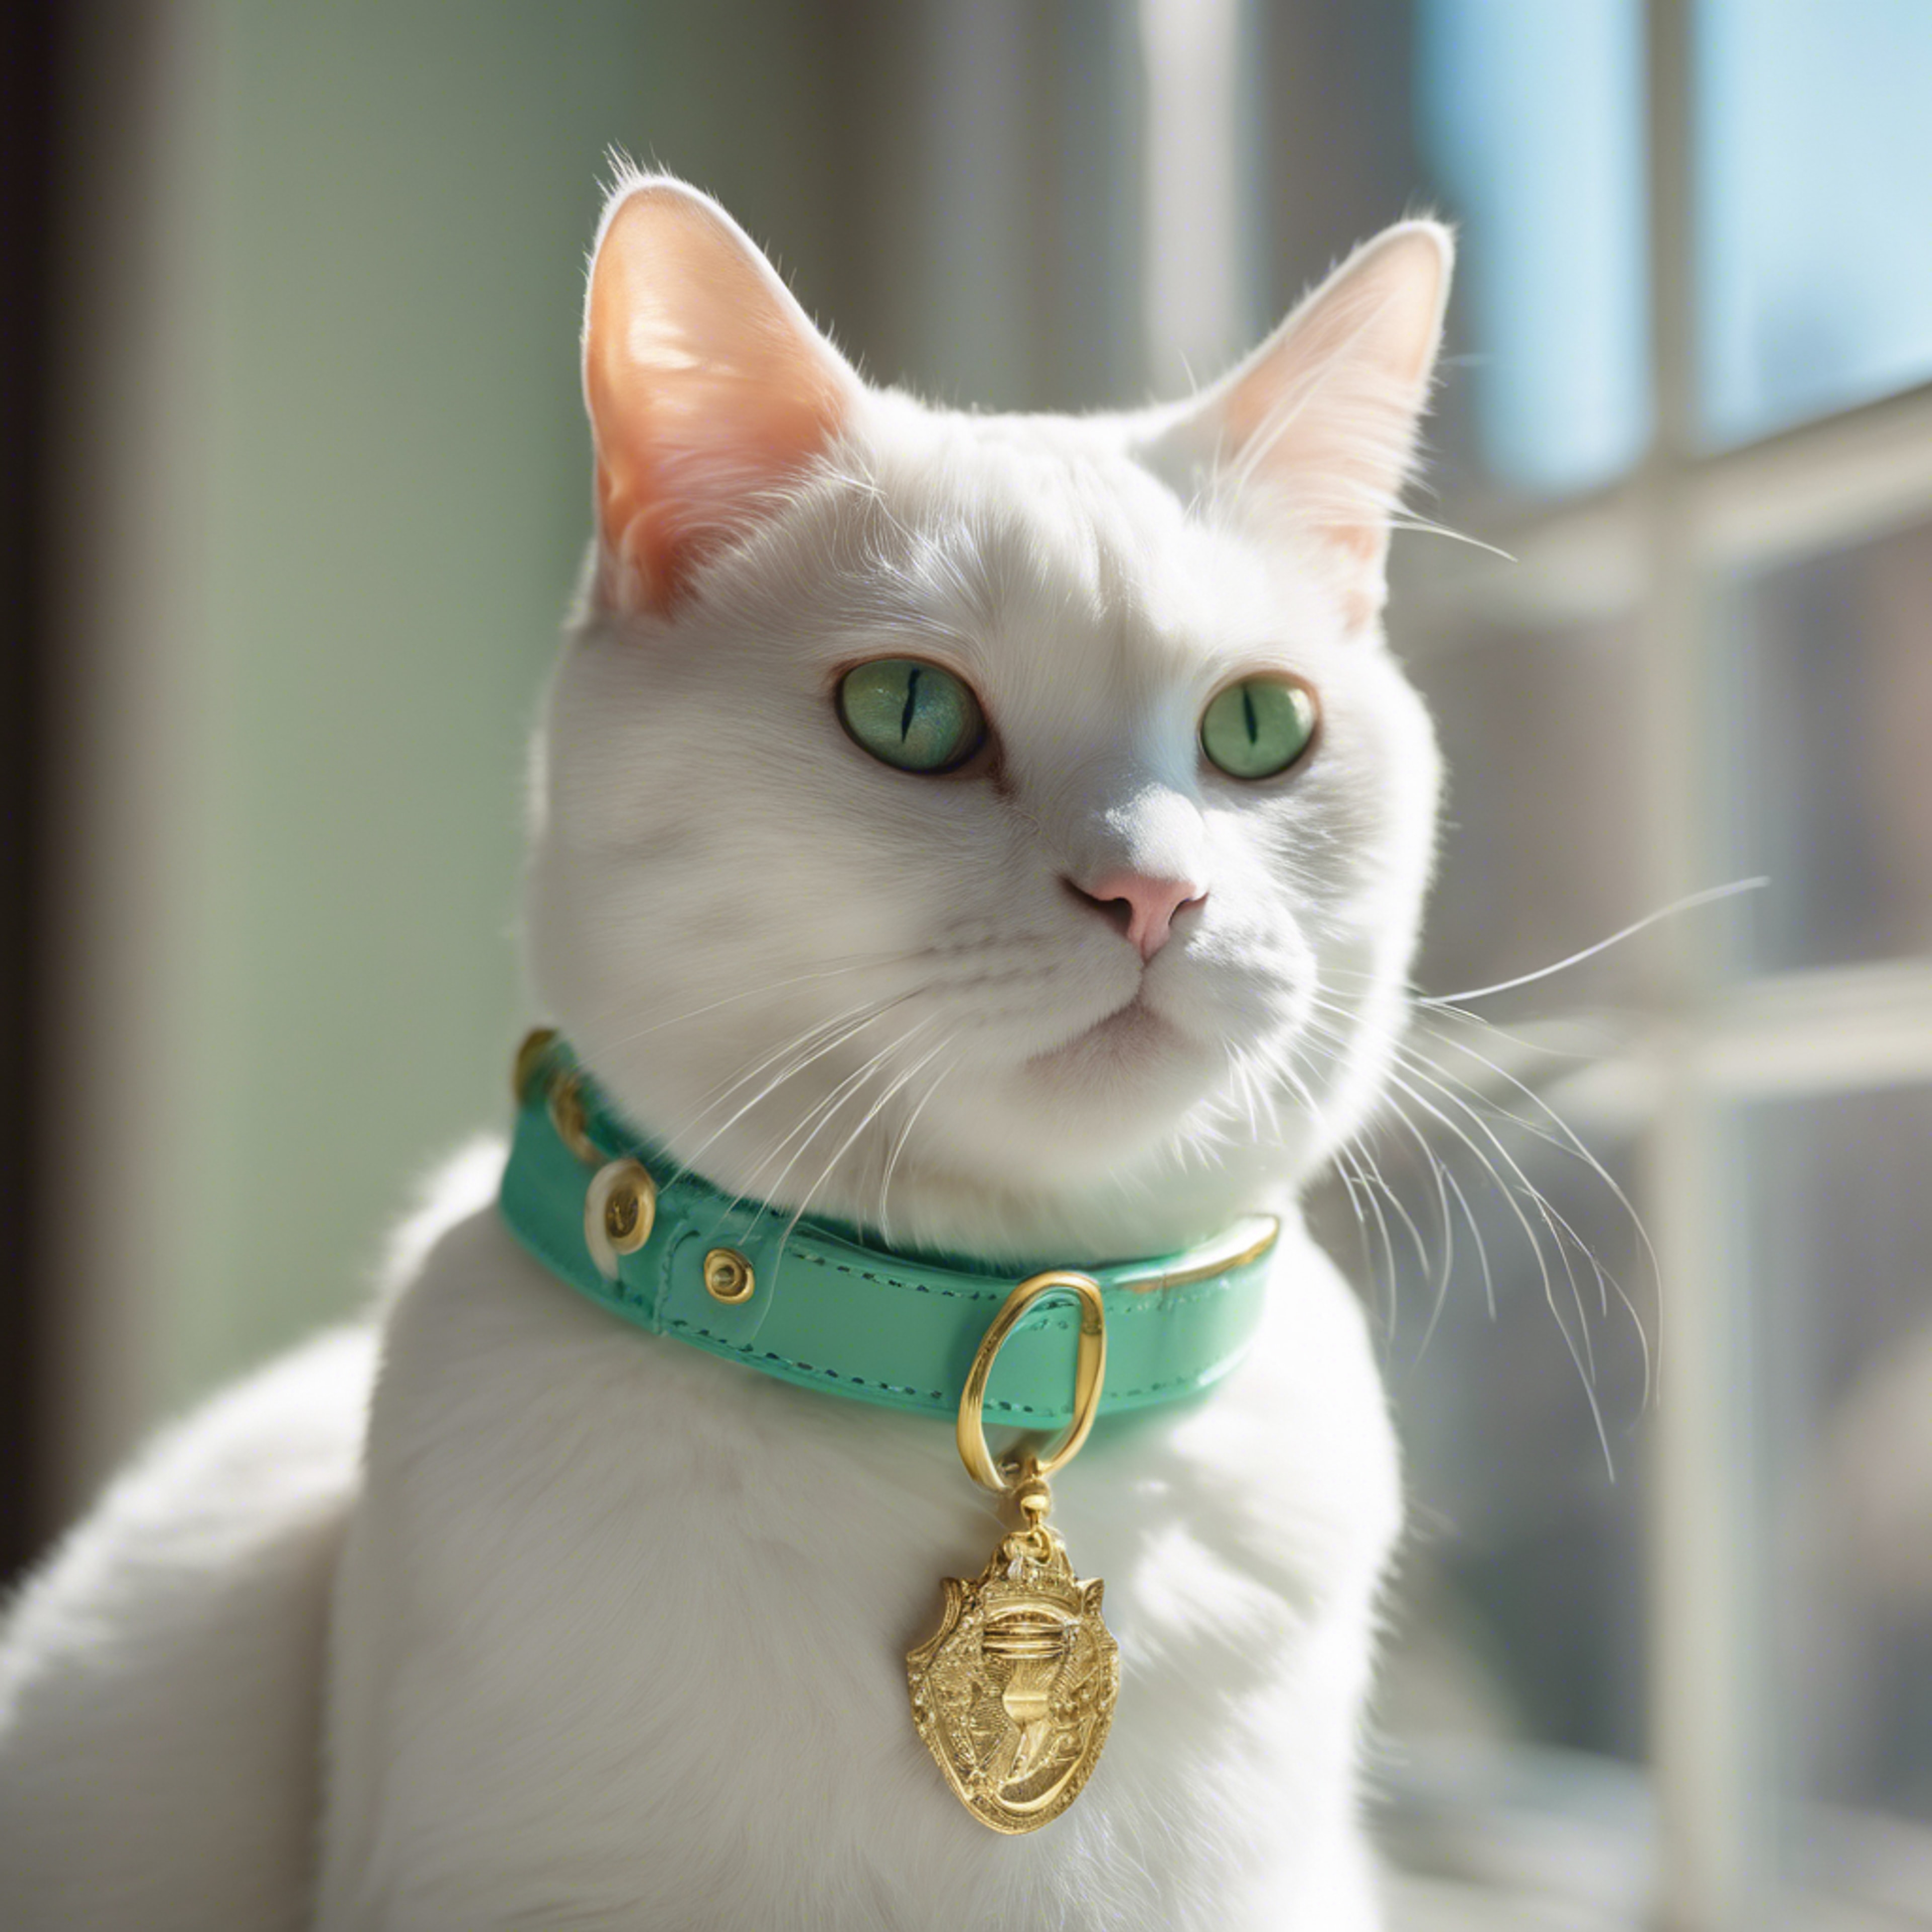 An adorable white cat wearing a preppy mint green collar with a gold buckle sitting in a sunny window. Hình nền[8de0351476e04873aa5e]